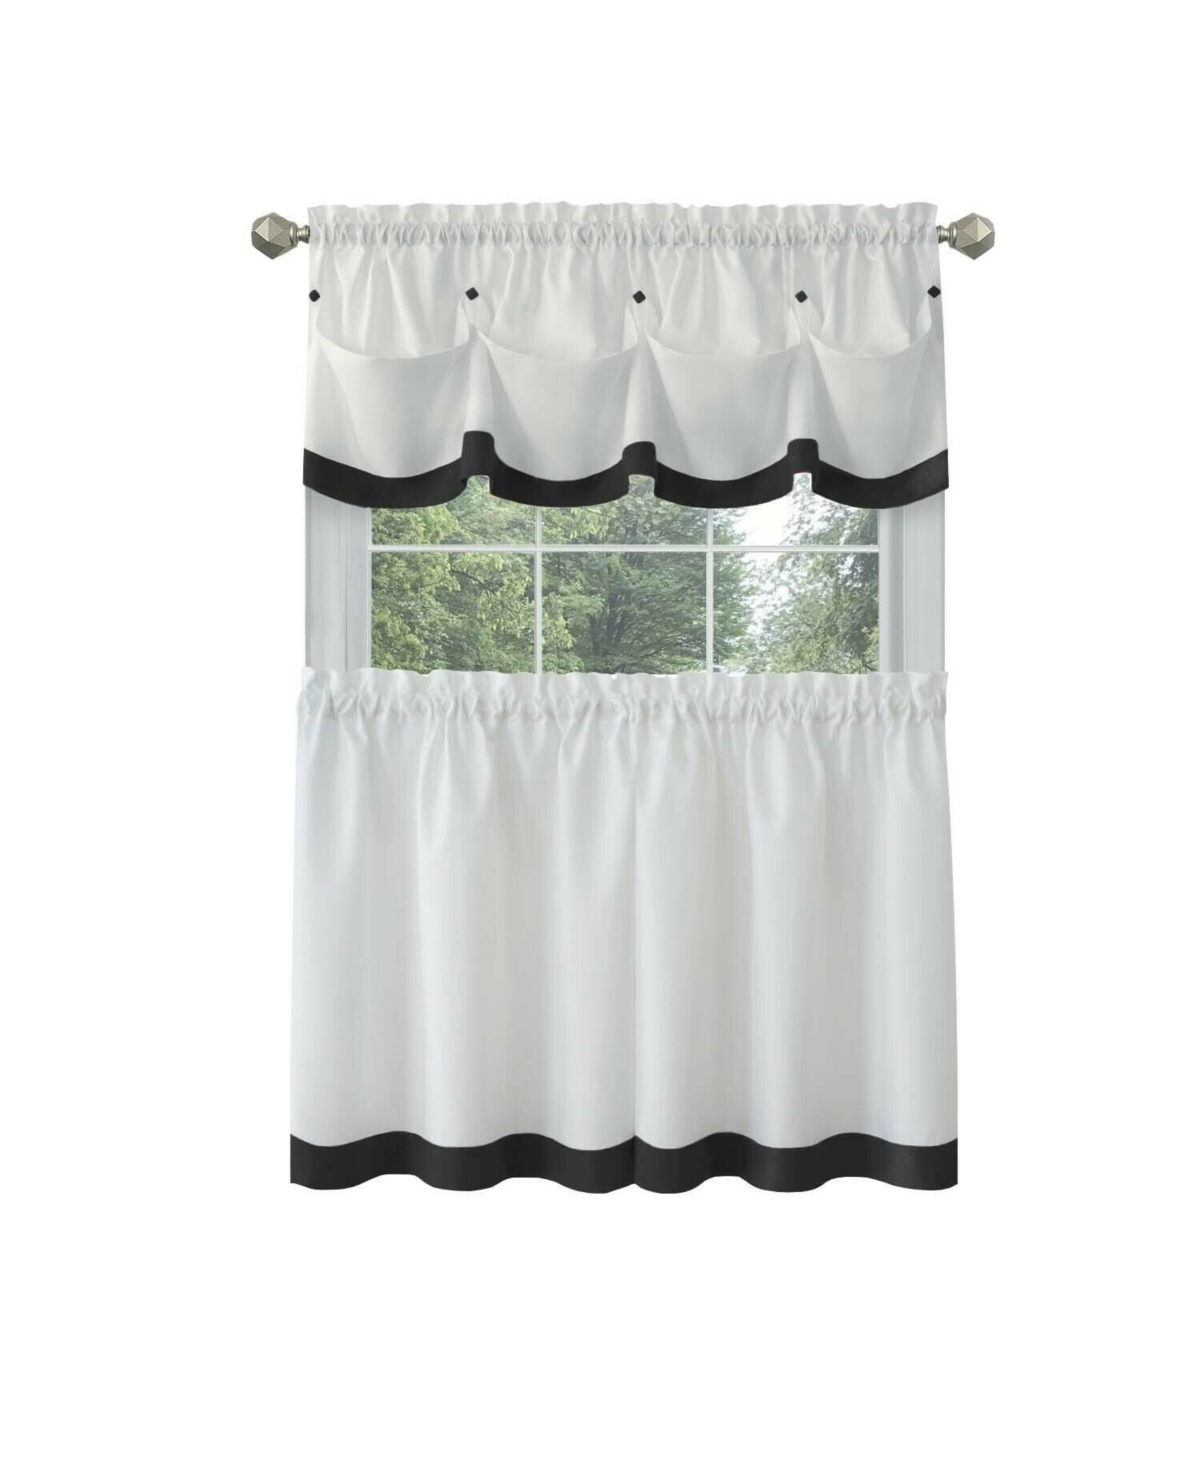 Country Living Farmhouse 3 Pc Solid Cafe Kitchen Curtain Tier & Tucked Valance Set - Black